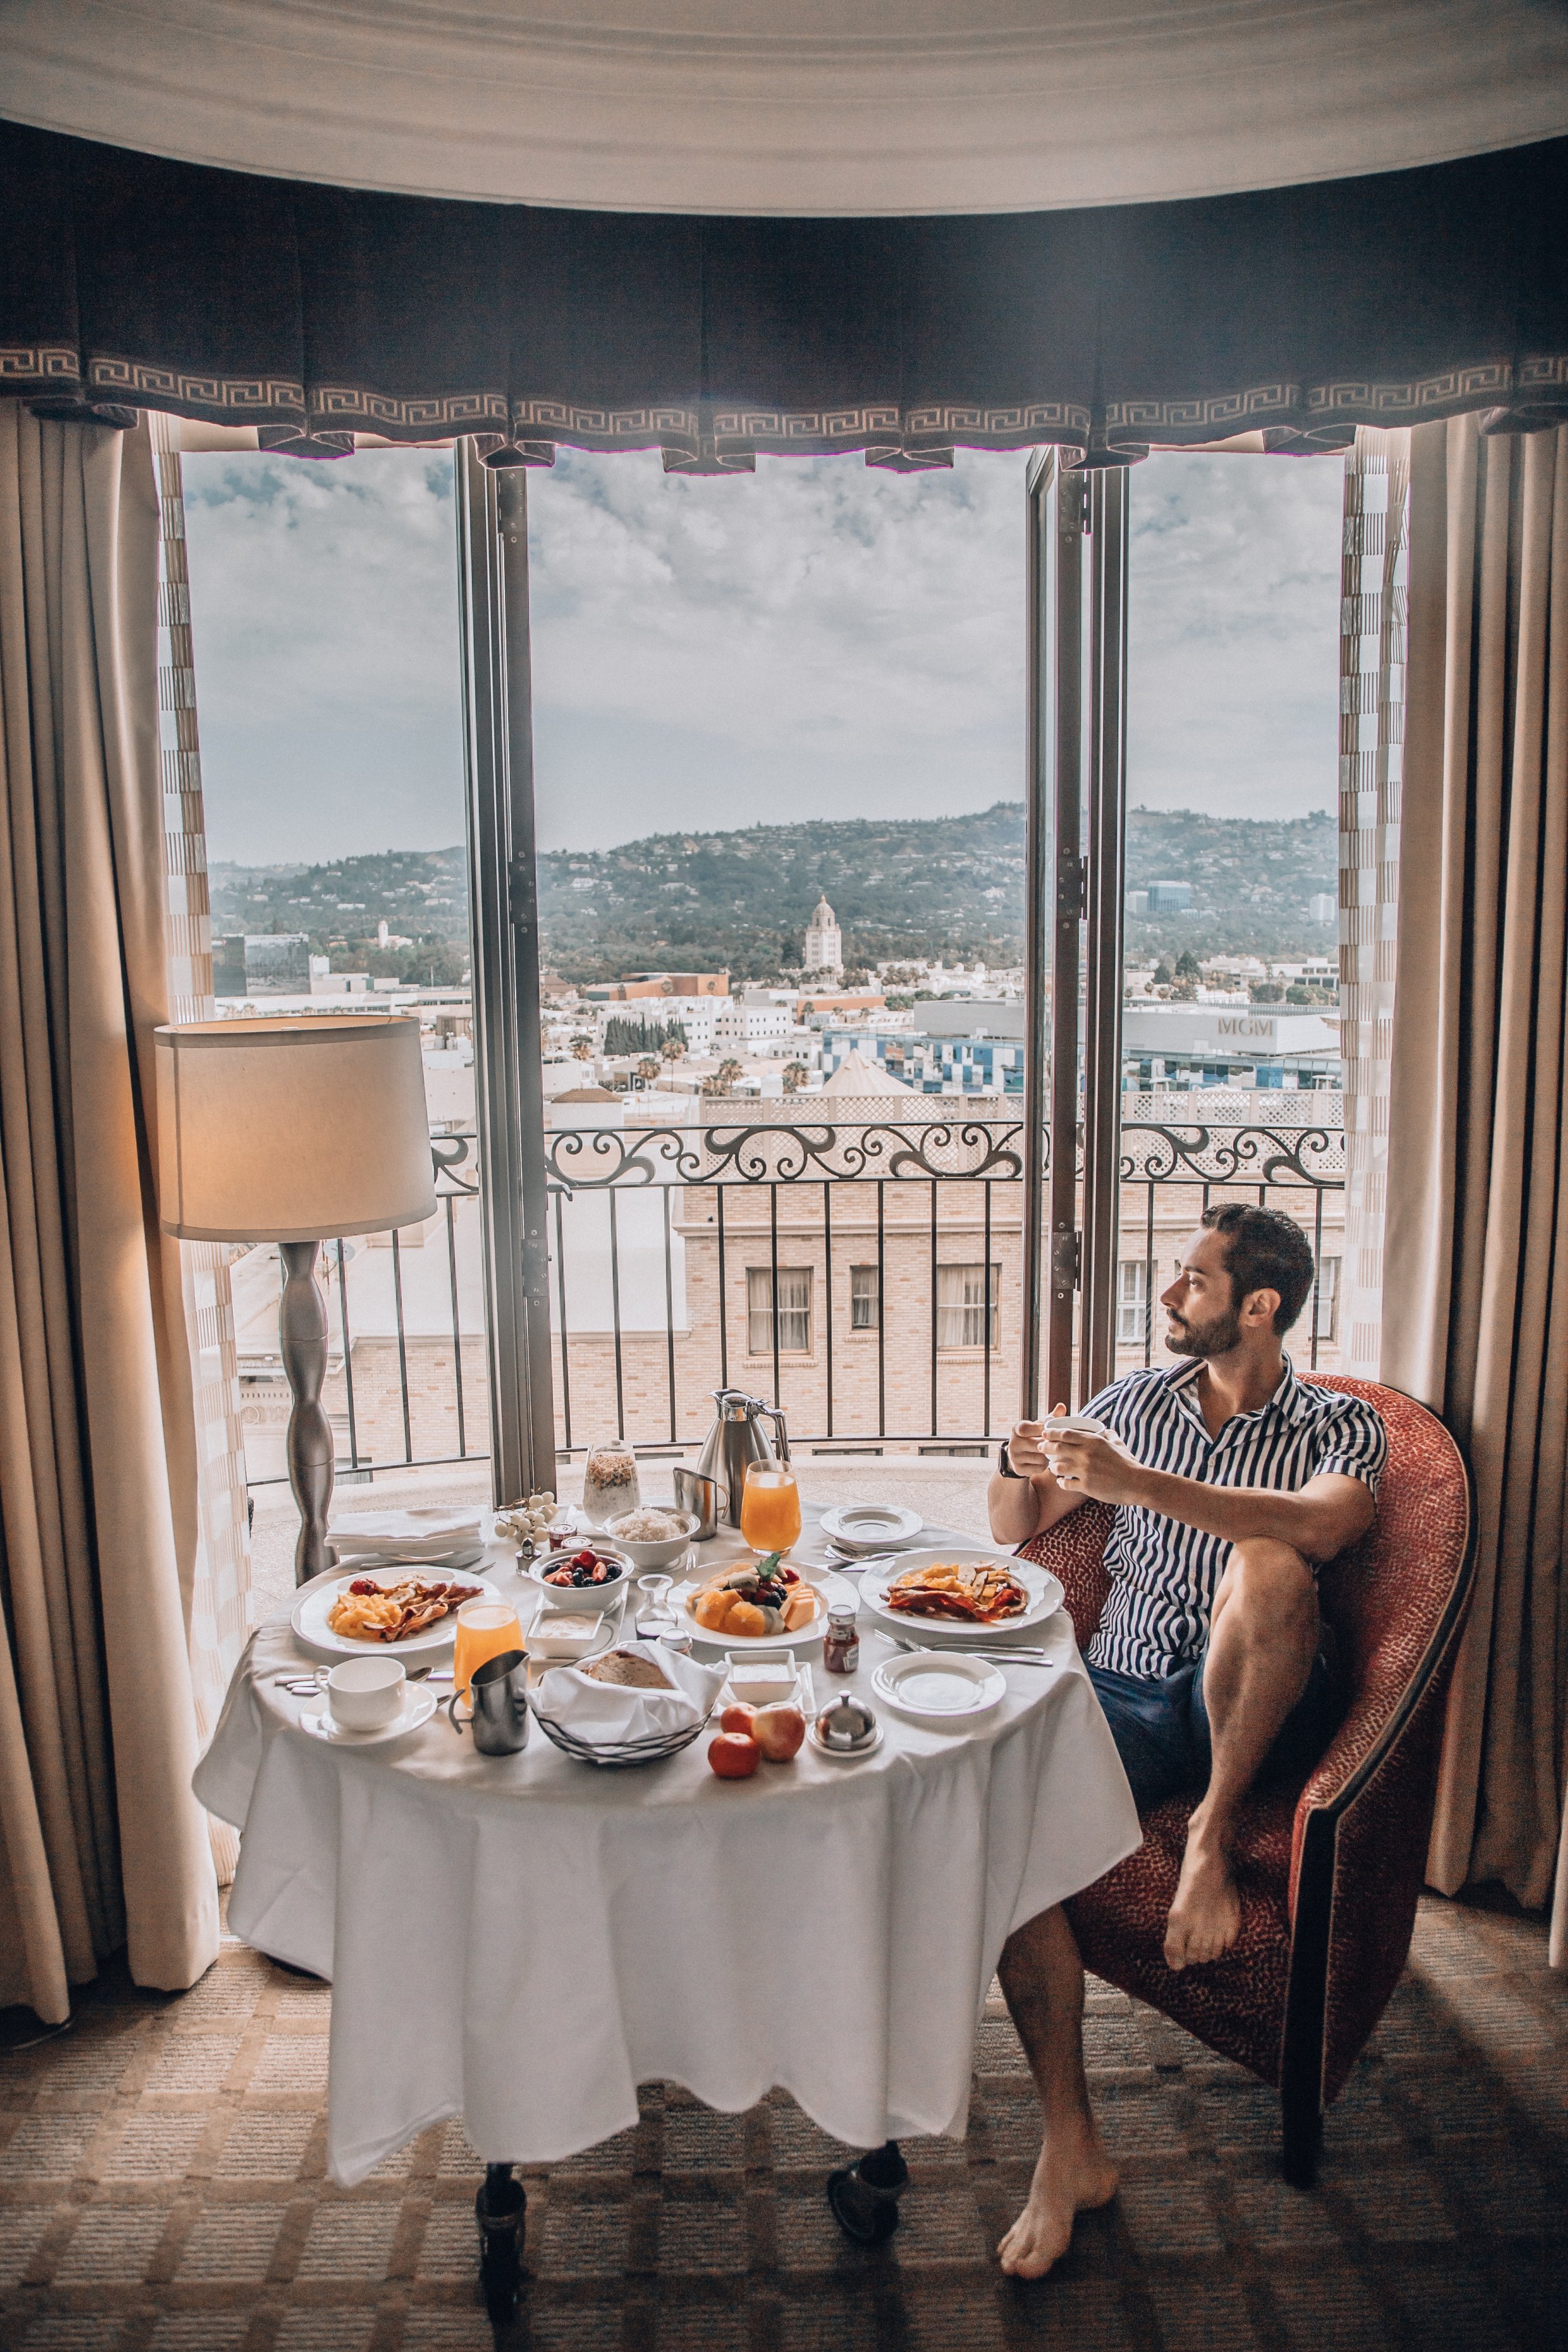 I really enjoy having breakfast especially when it’s in a beautiful suite with a stunning view of Beverly Hills.